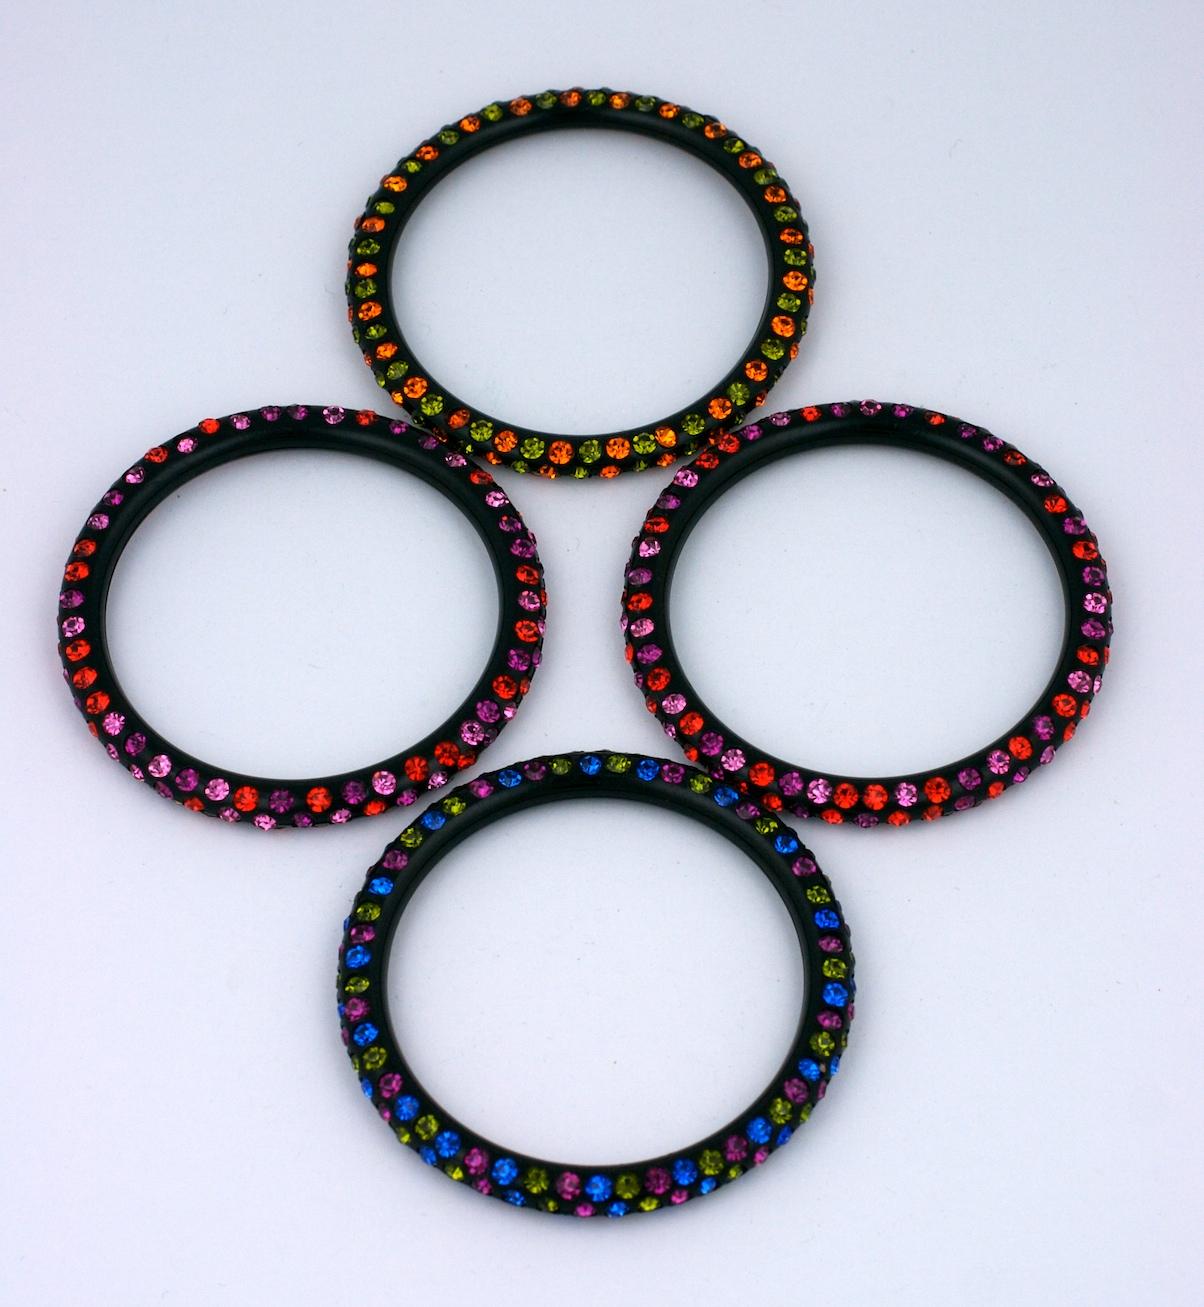 Set of 4 sparkle bracelets from the 1980's. Colored crystals set in bakelite like plastic. Great stacked or worn alone. Very interesting and versatile color ways. 1980's USA. 